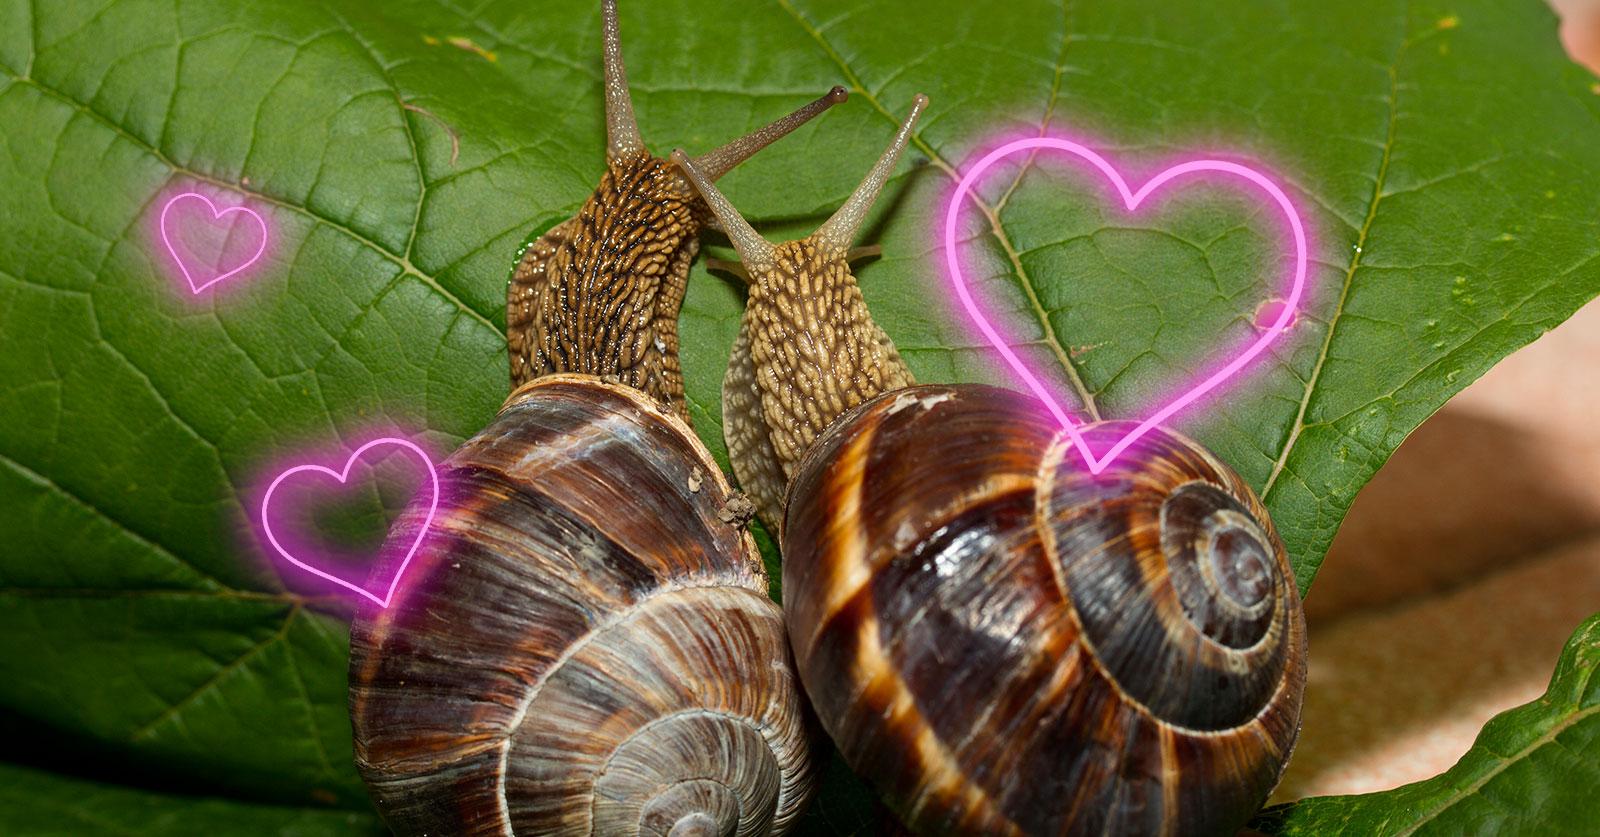 Shell-shocked: Rare snail loses out in love triangle